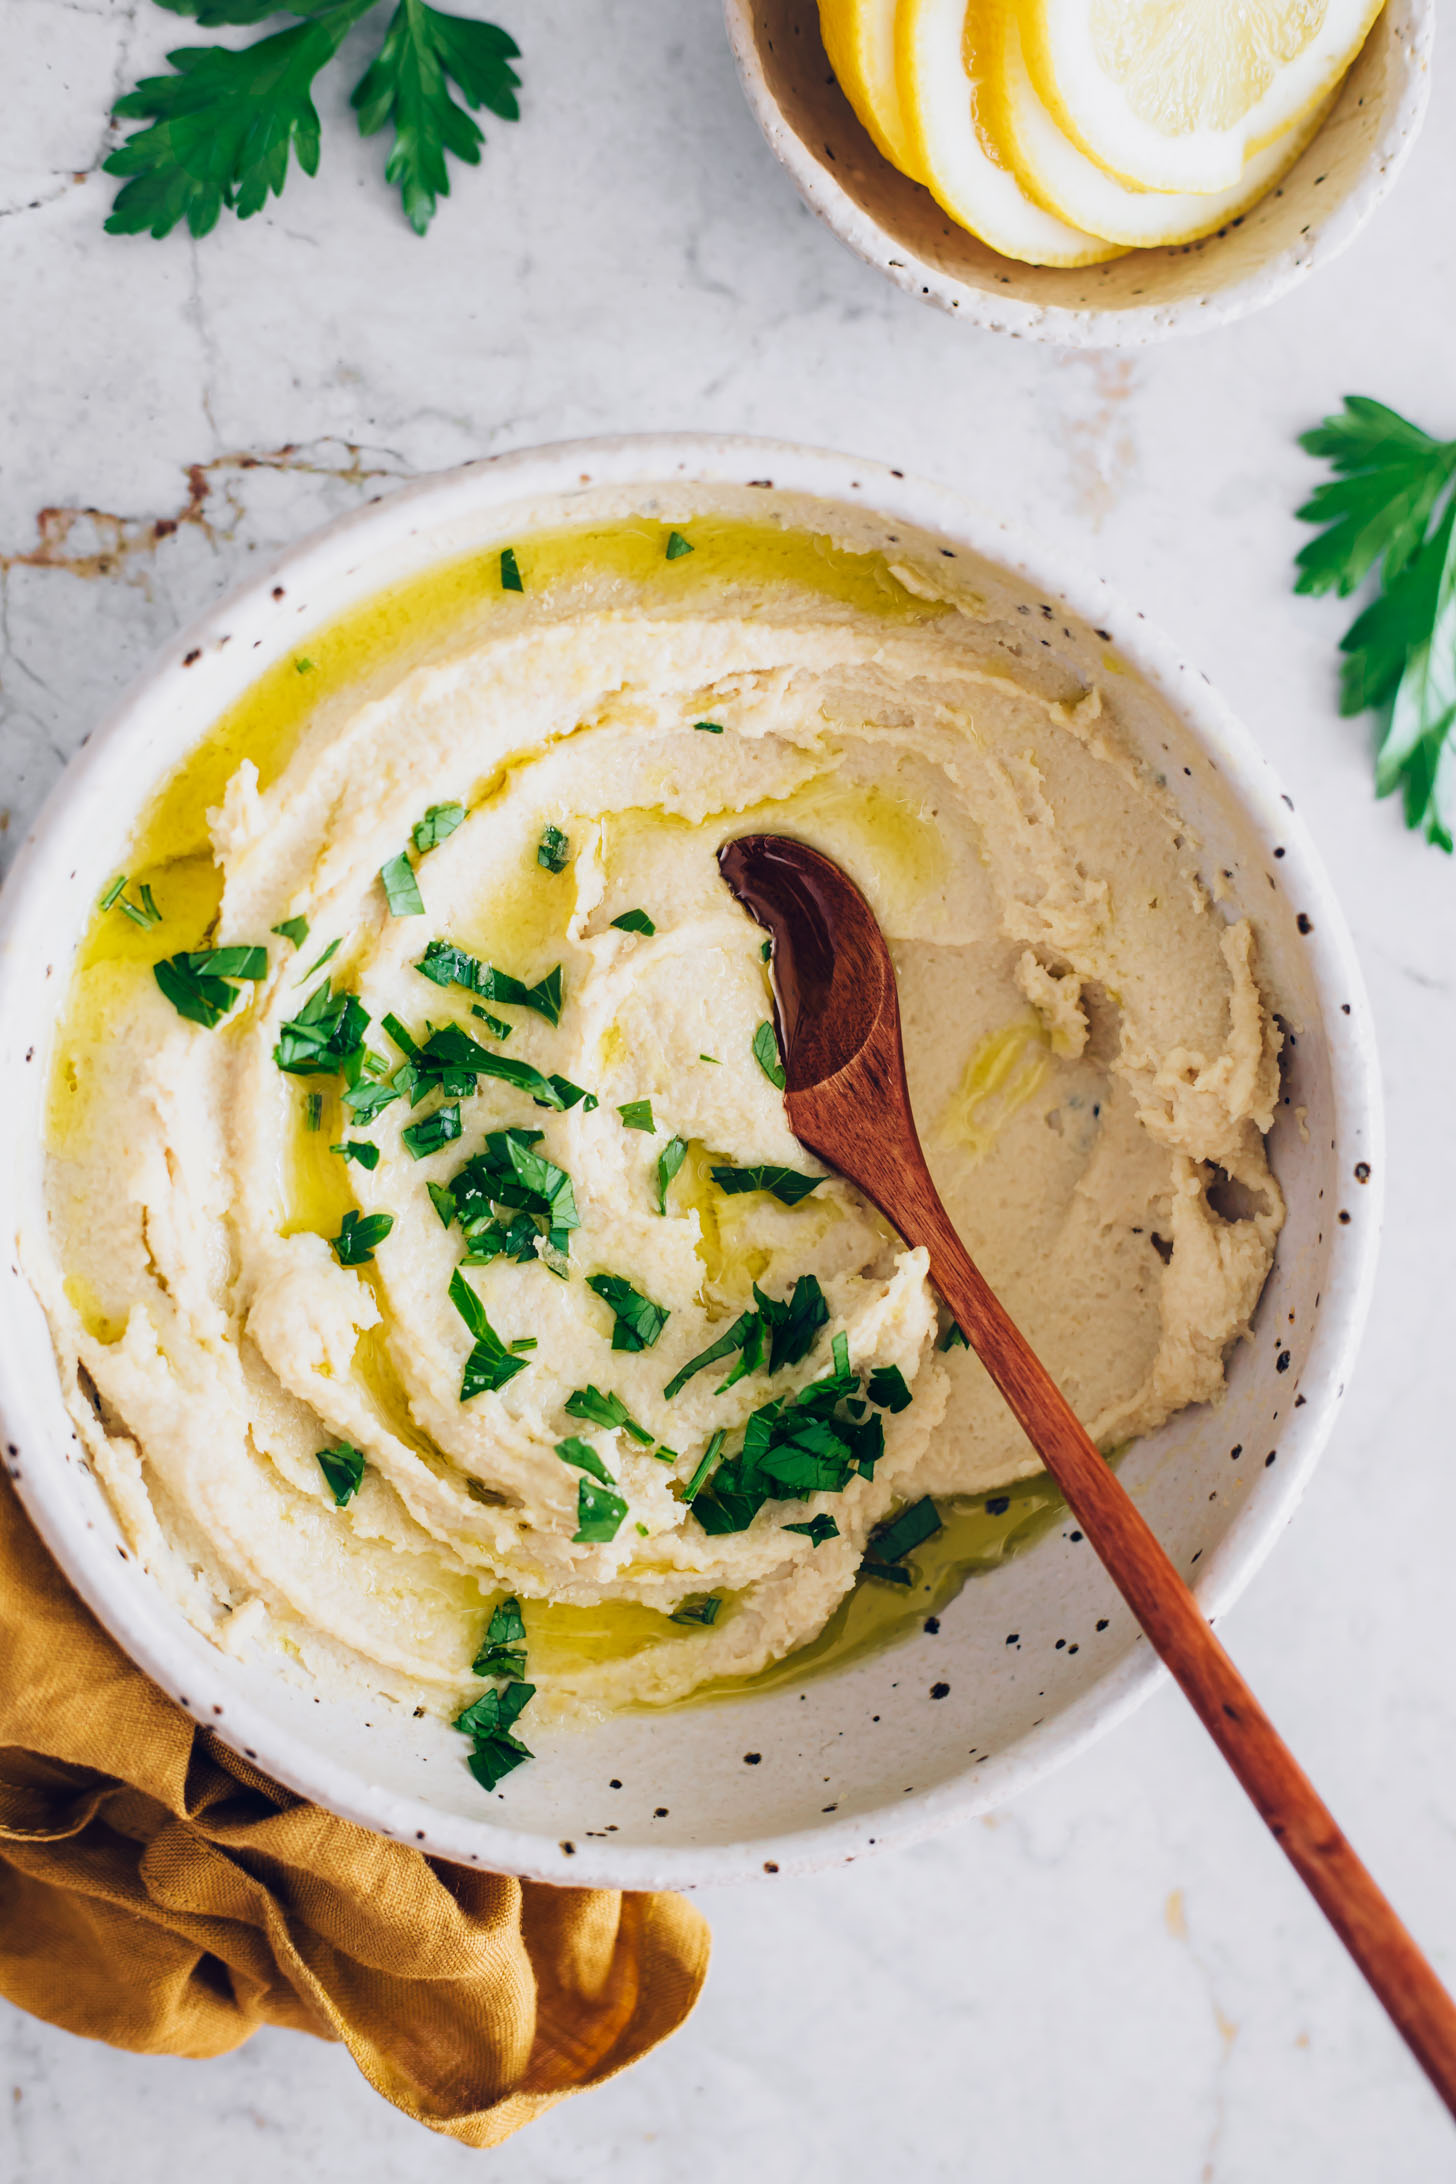 Wooden spoon in a bowl of cashew ricotta